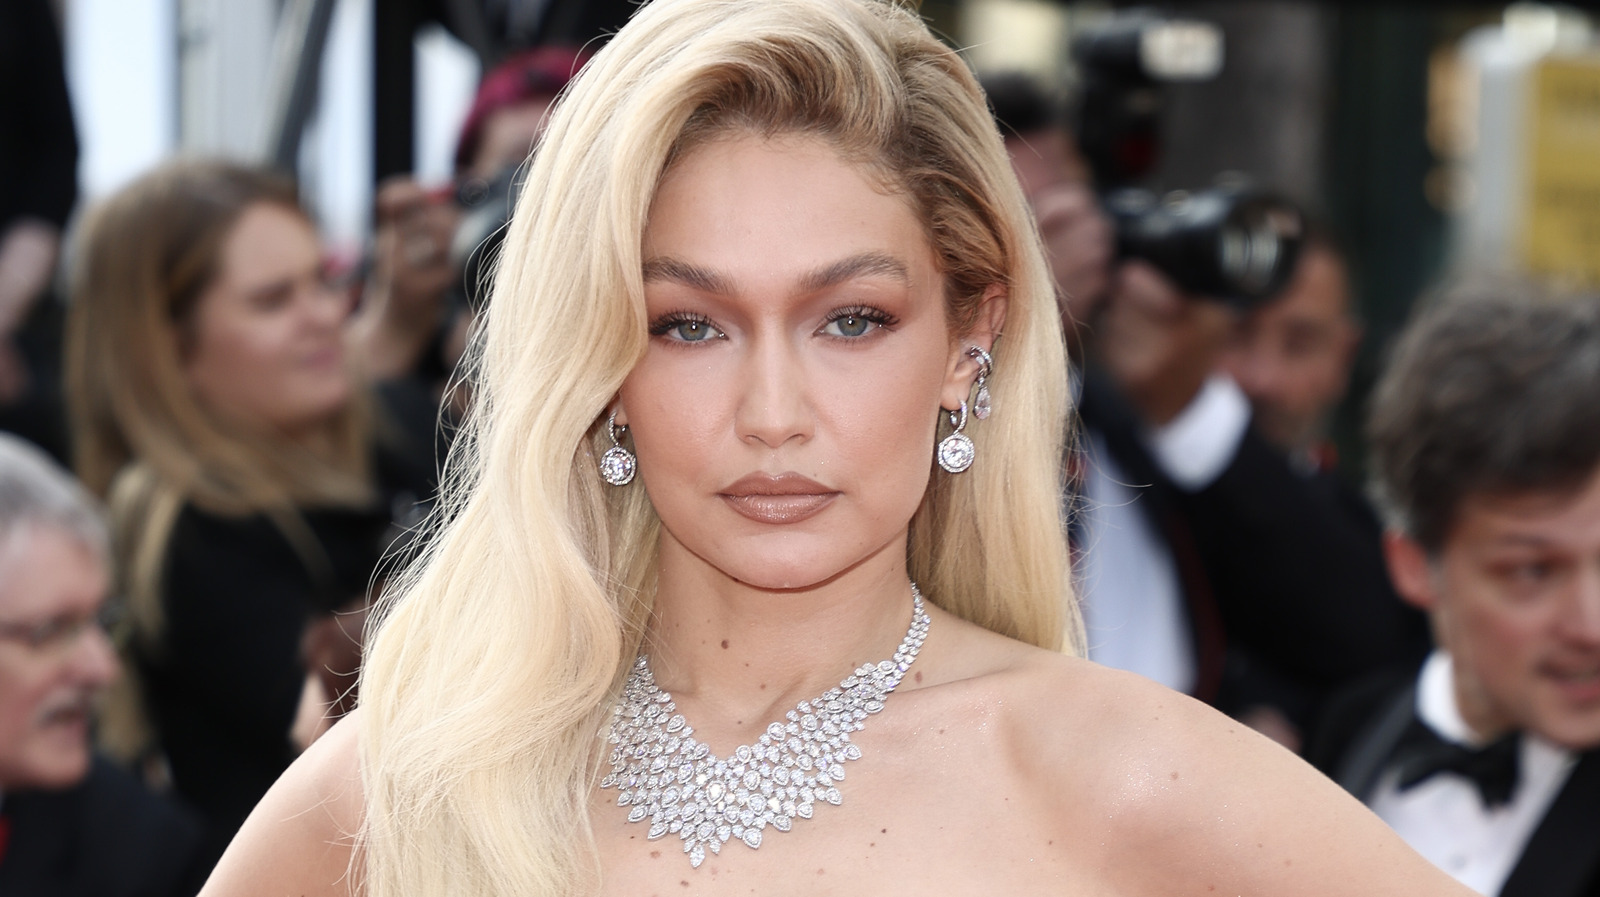 In this image released on September 22, Gigi Hadid attends Rihanna's  News Photo - Getty Images